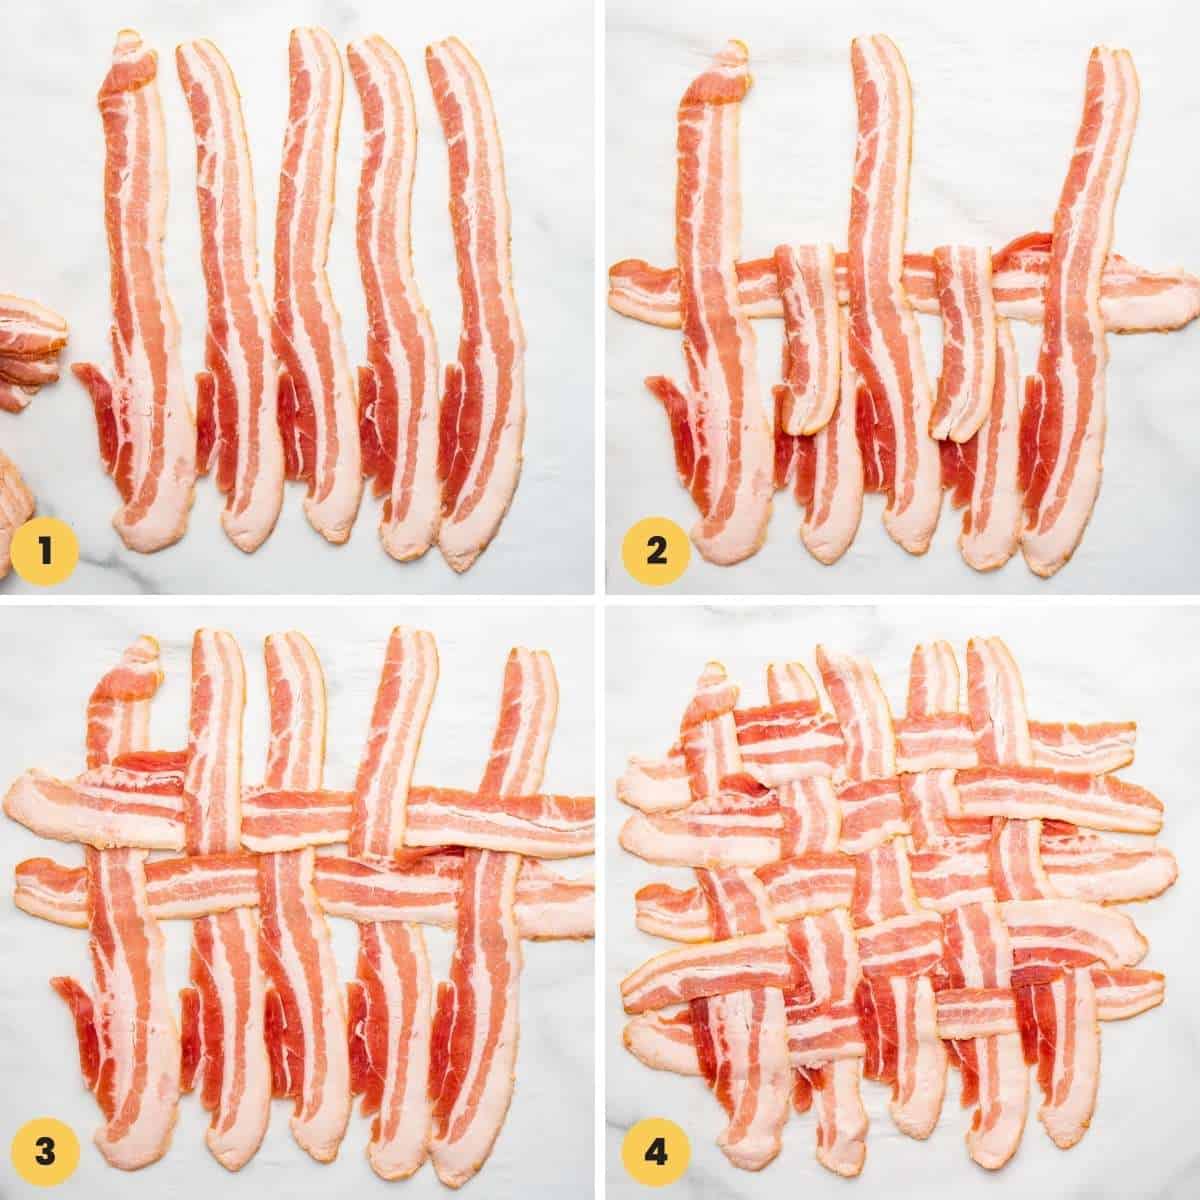 A collage of four images showing step by step how to make a bacon lattice to wrap a turkey.